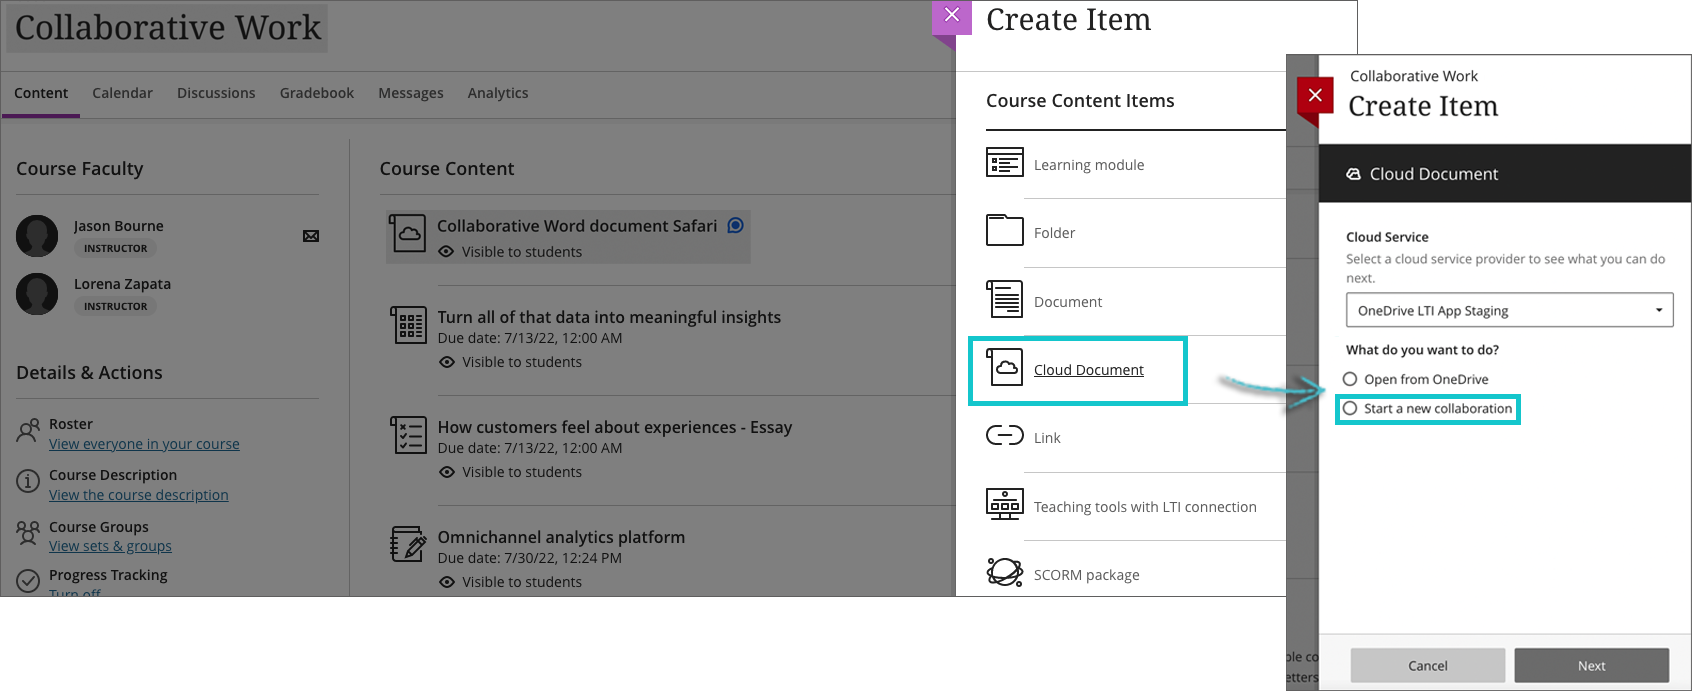 In the Course Content page, select Add Content, then Cloud Document and then Start a new Colaboration